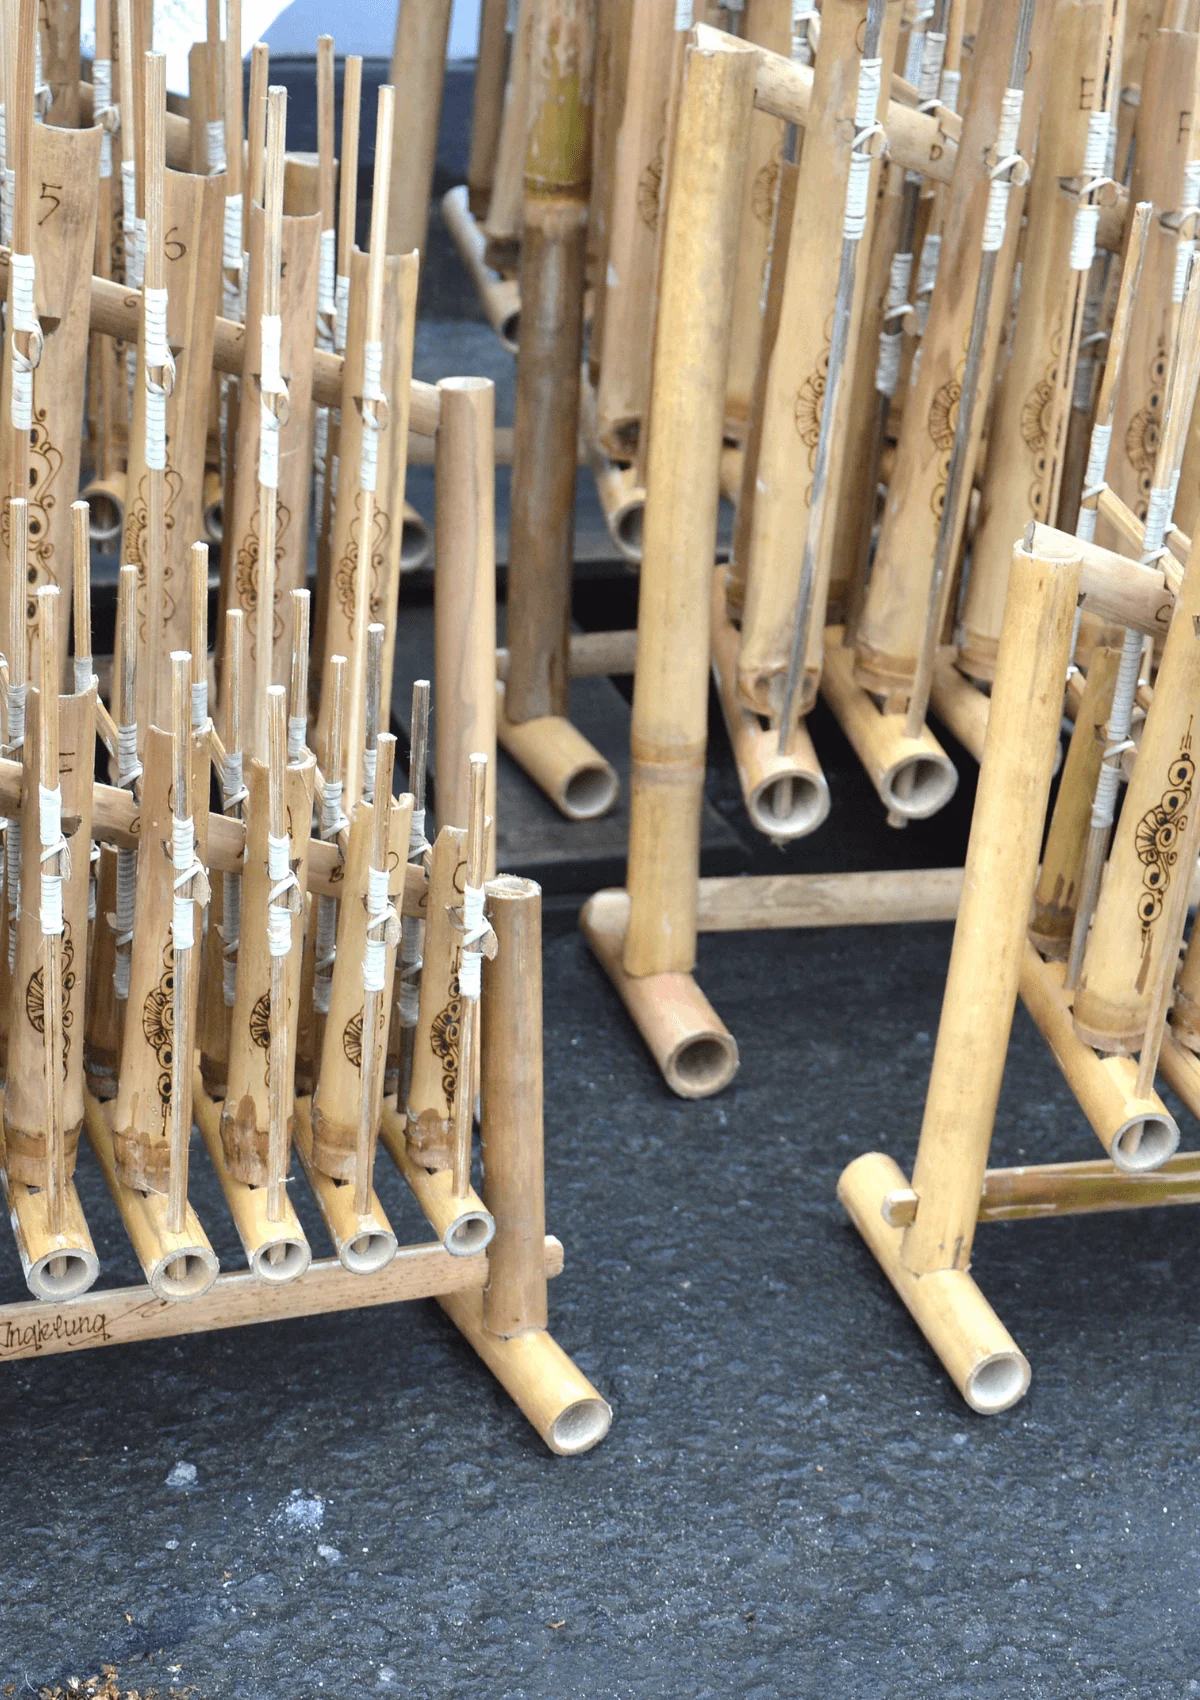 angklung are typical Indonesian musical instruments